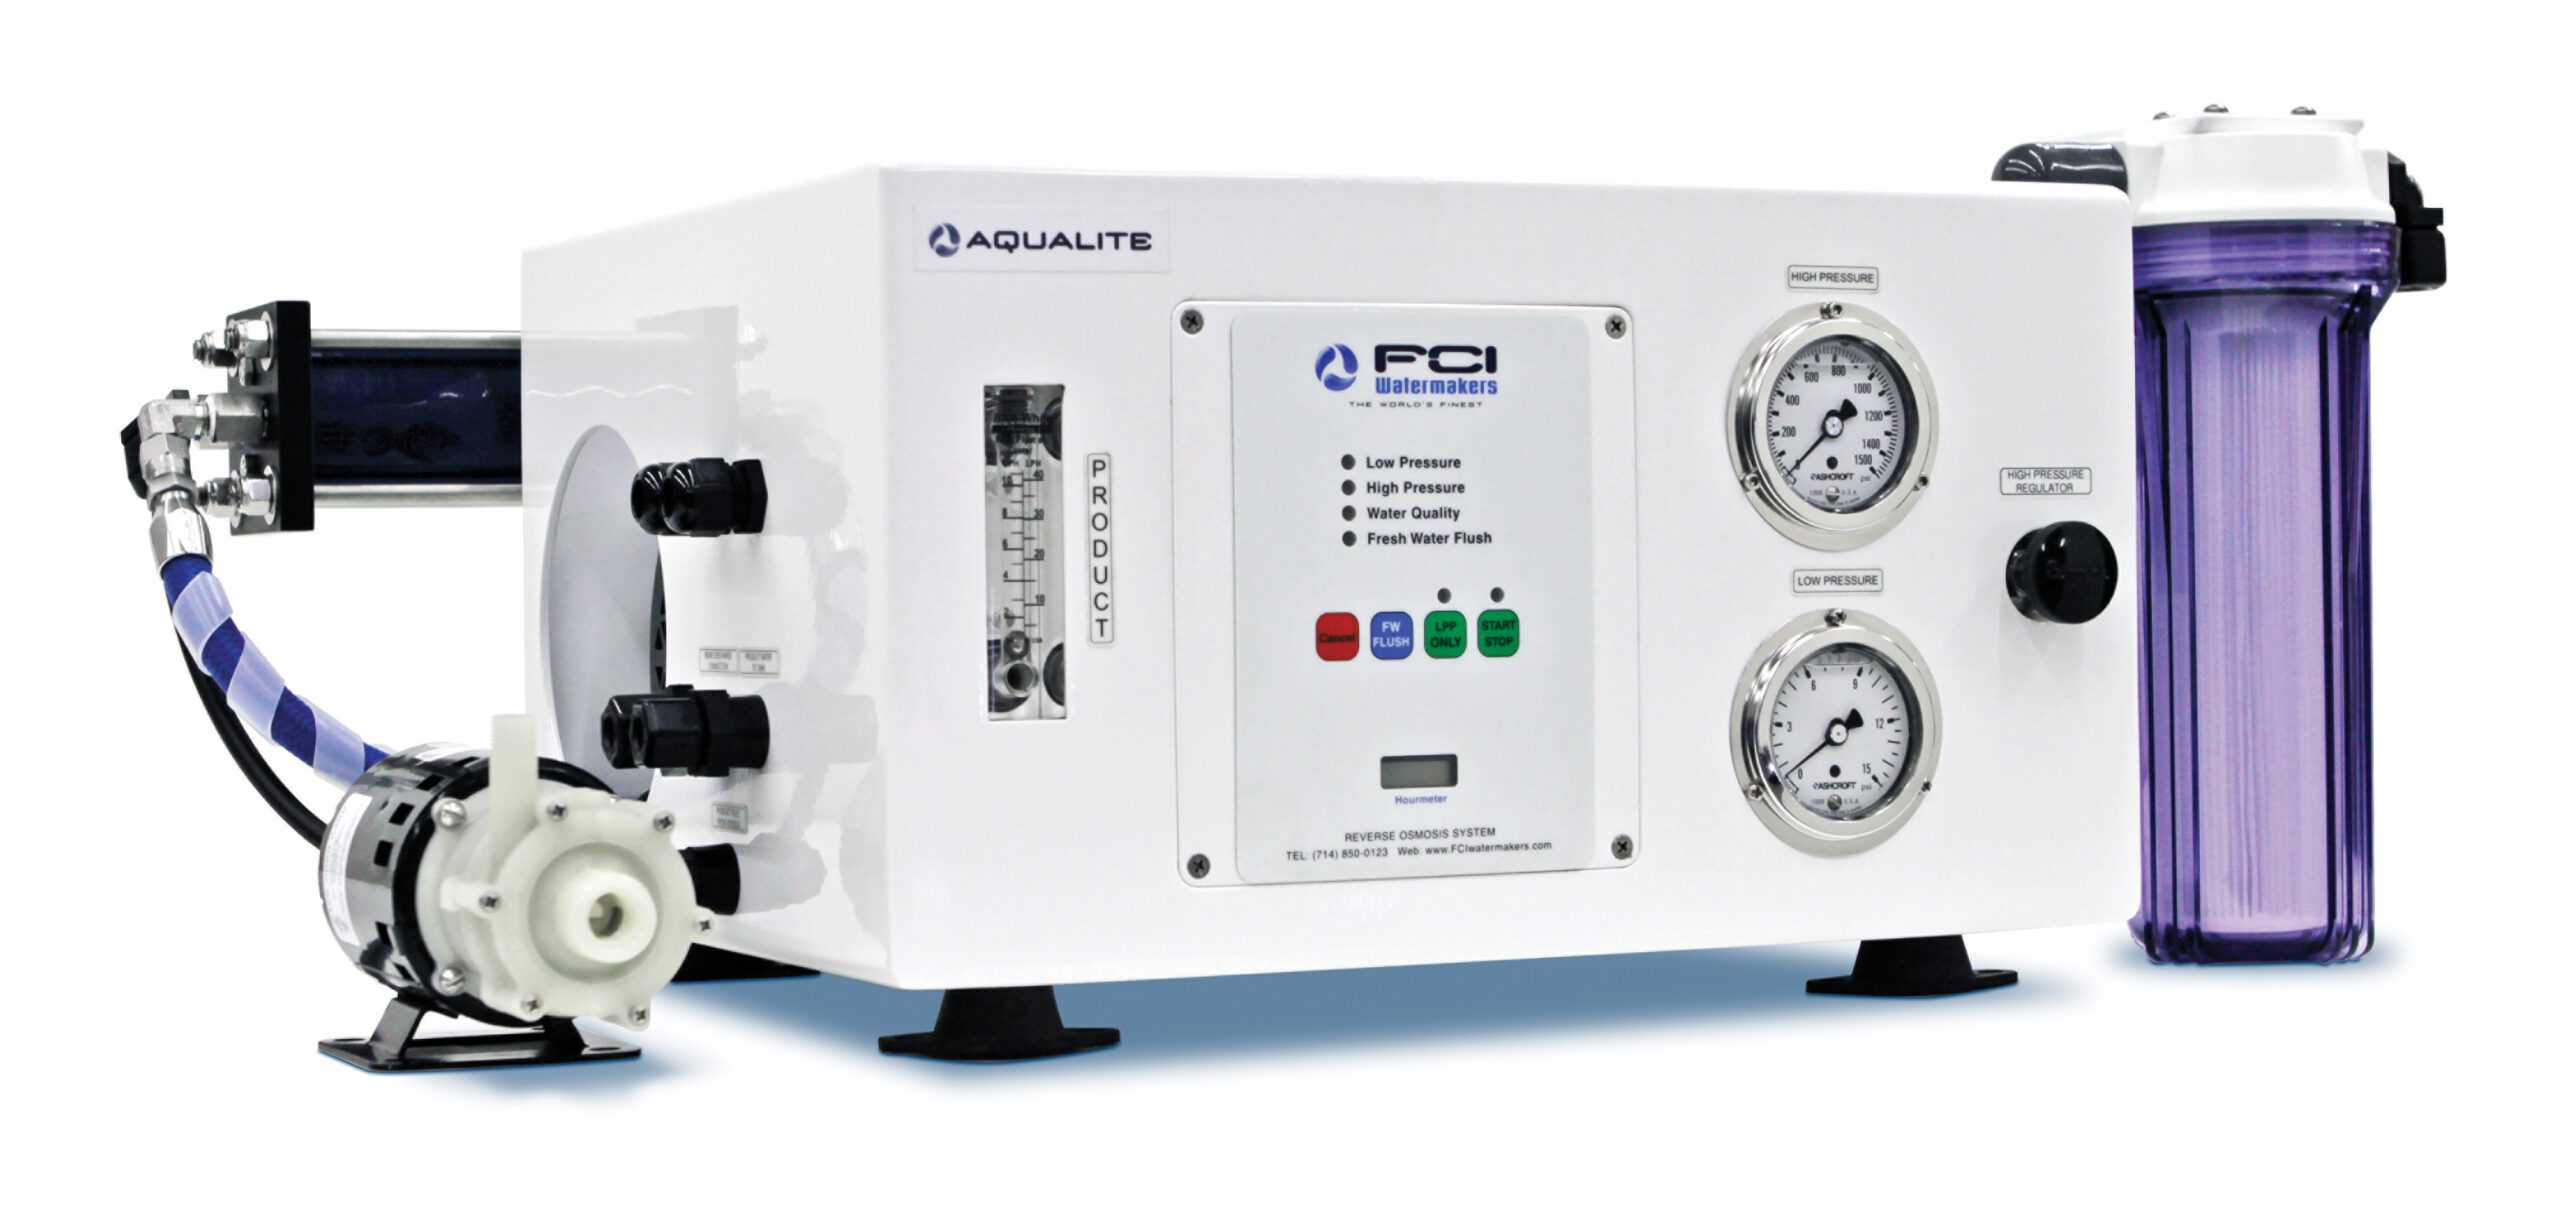 FCI Watermakers - Aqualite Series with production output of 200 GPD